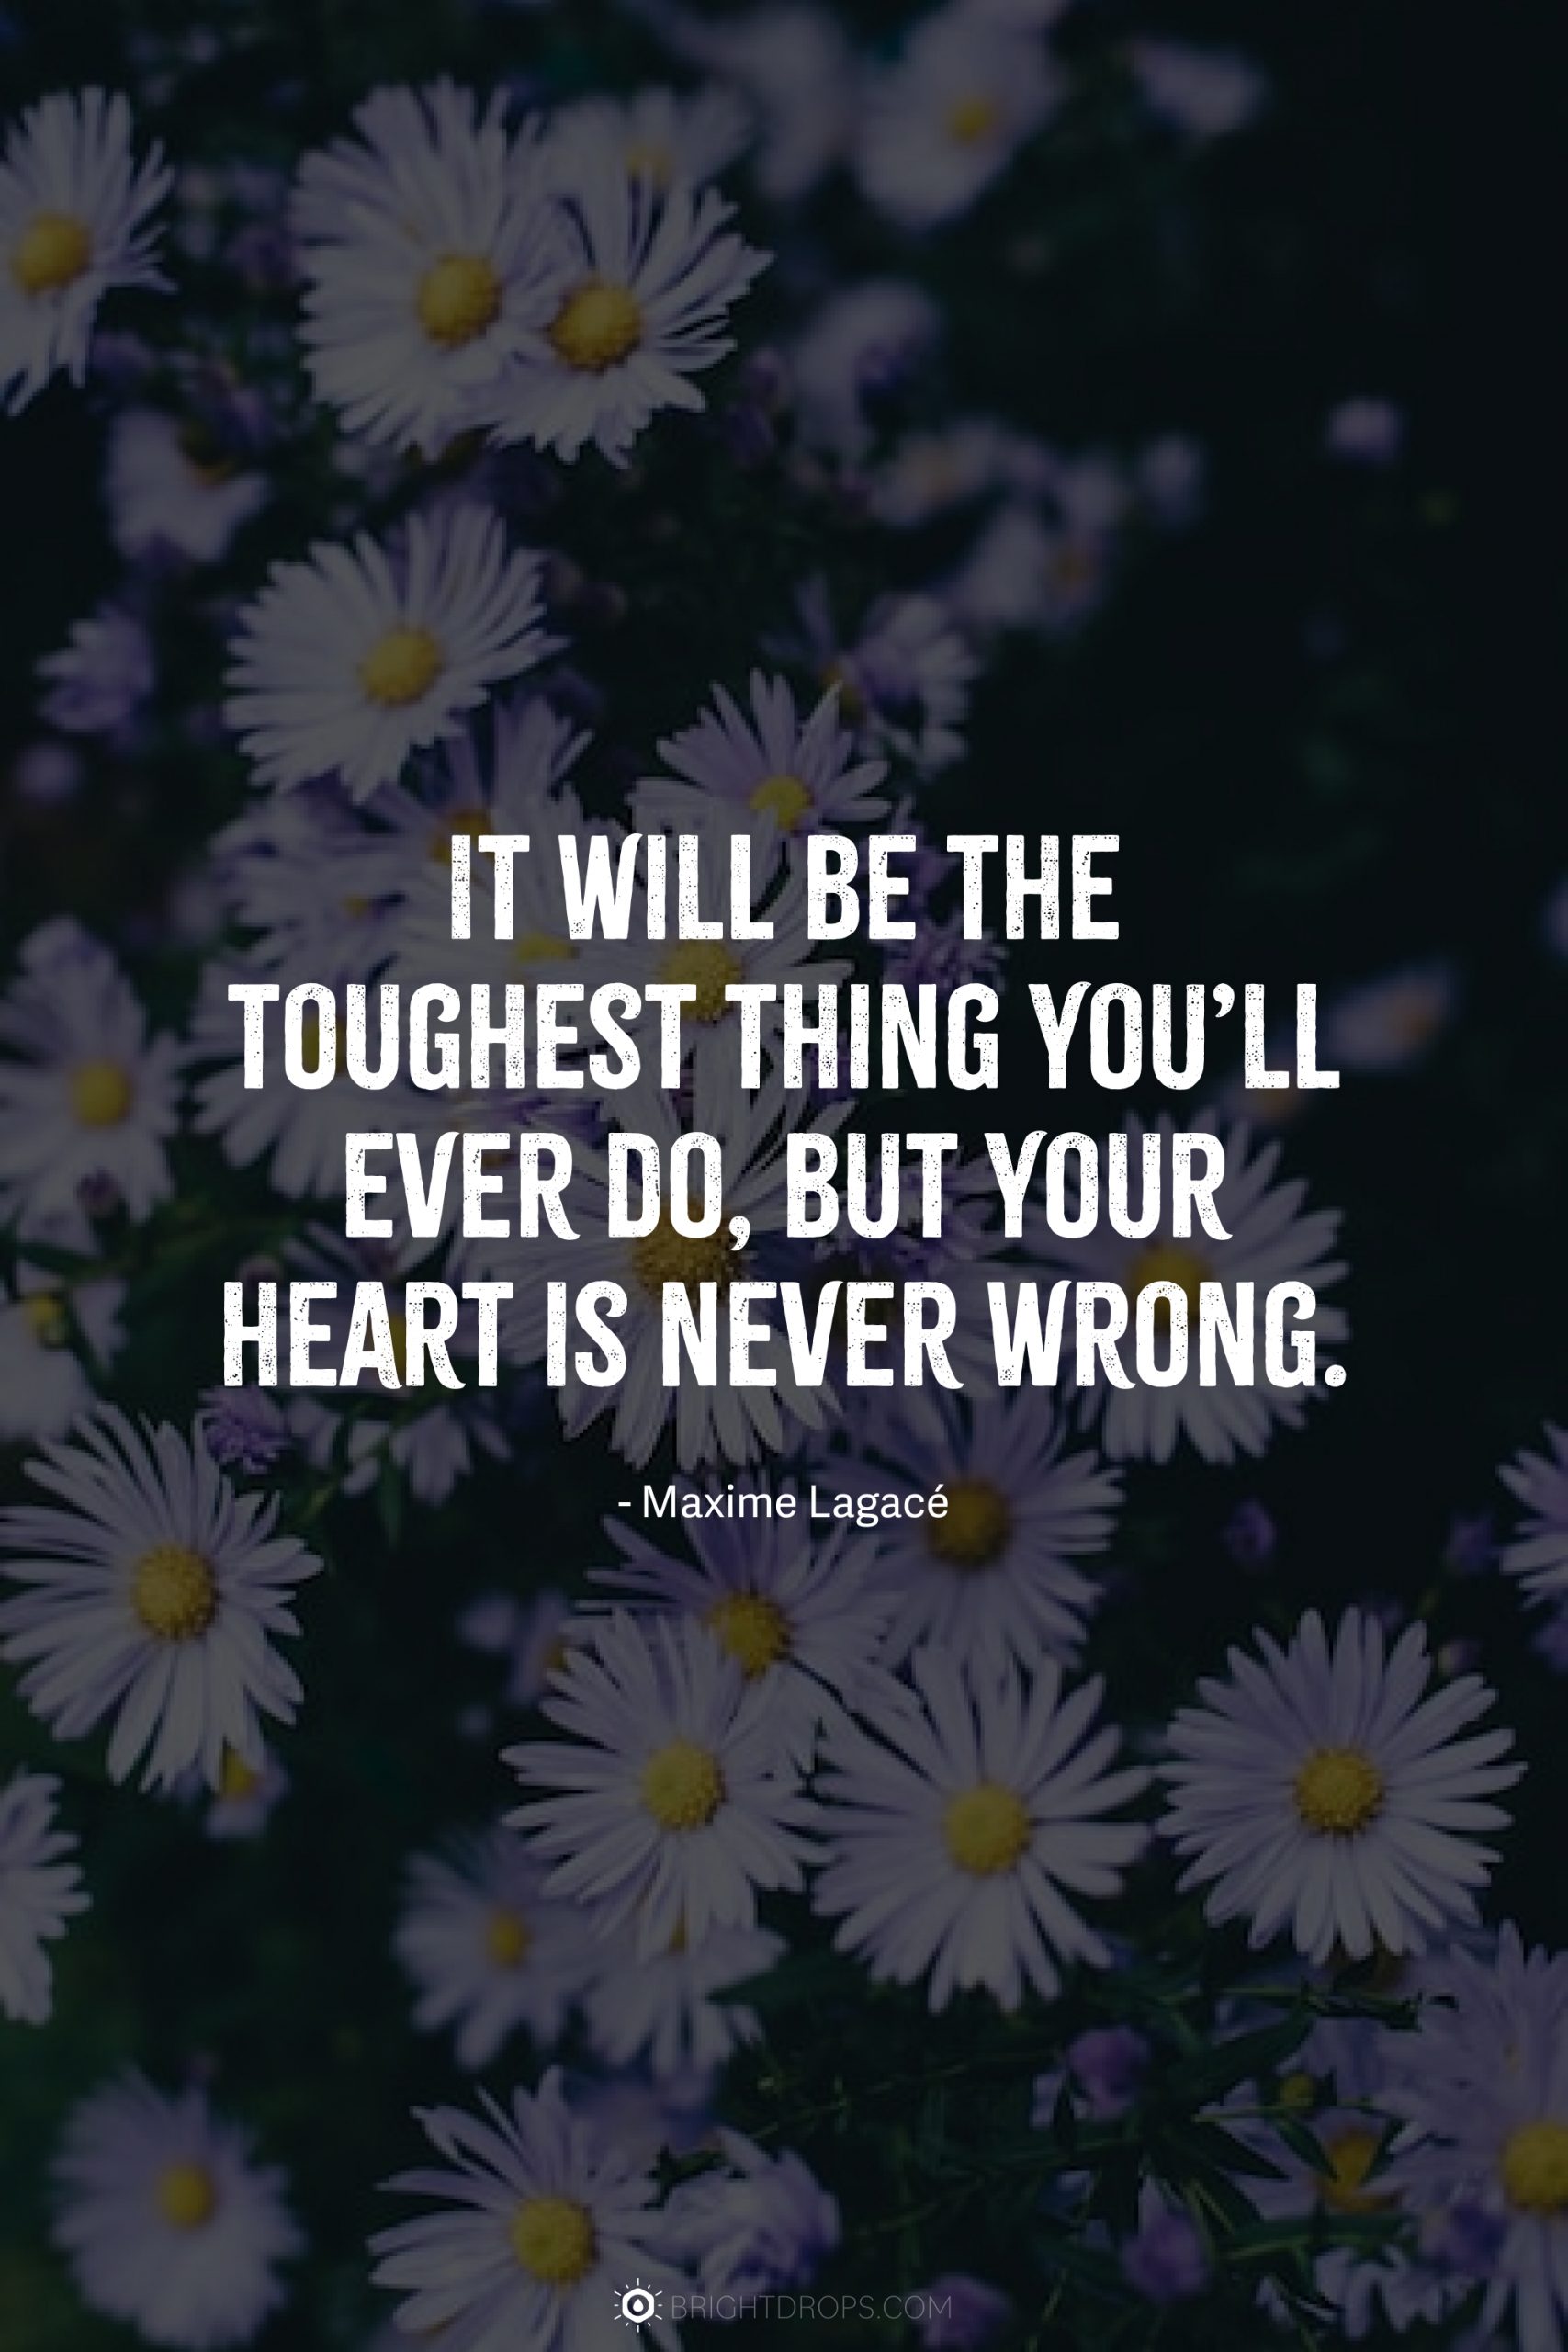 It will be the toughest thing you’ll ever do, but your heart is never wrong.